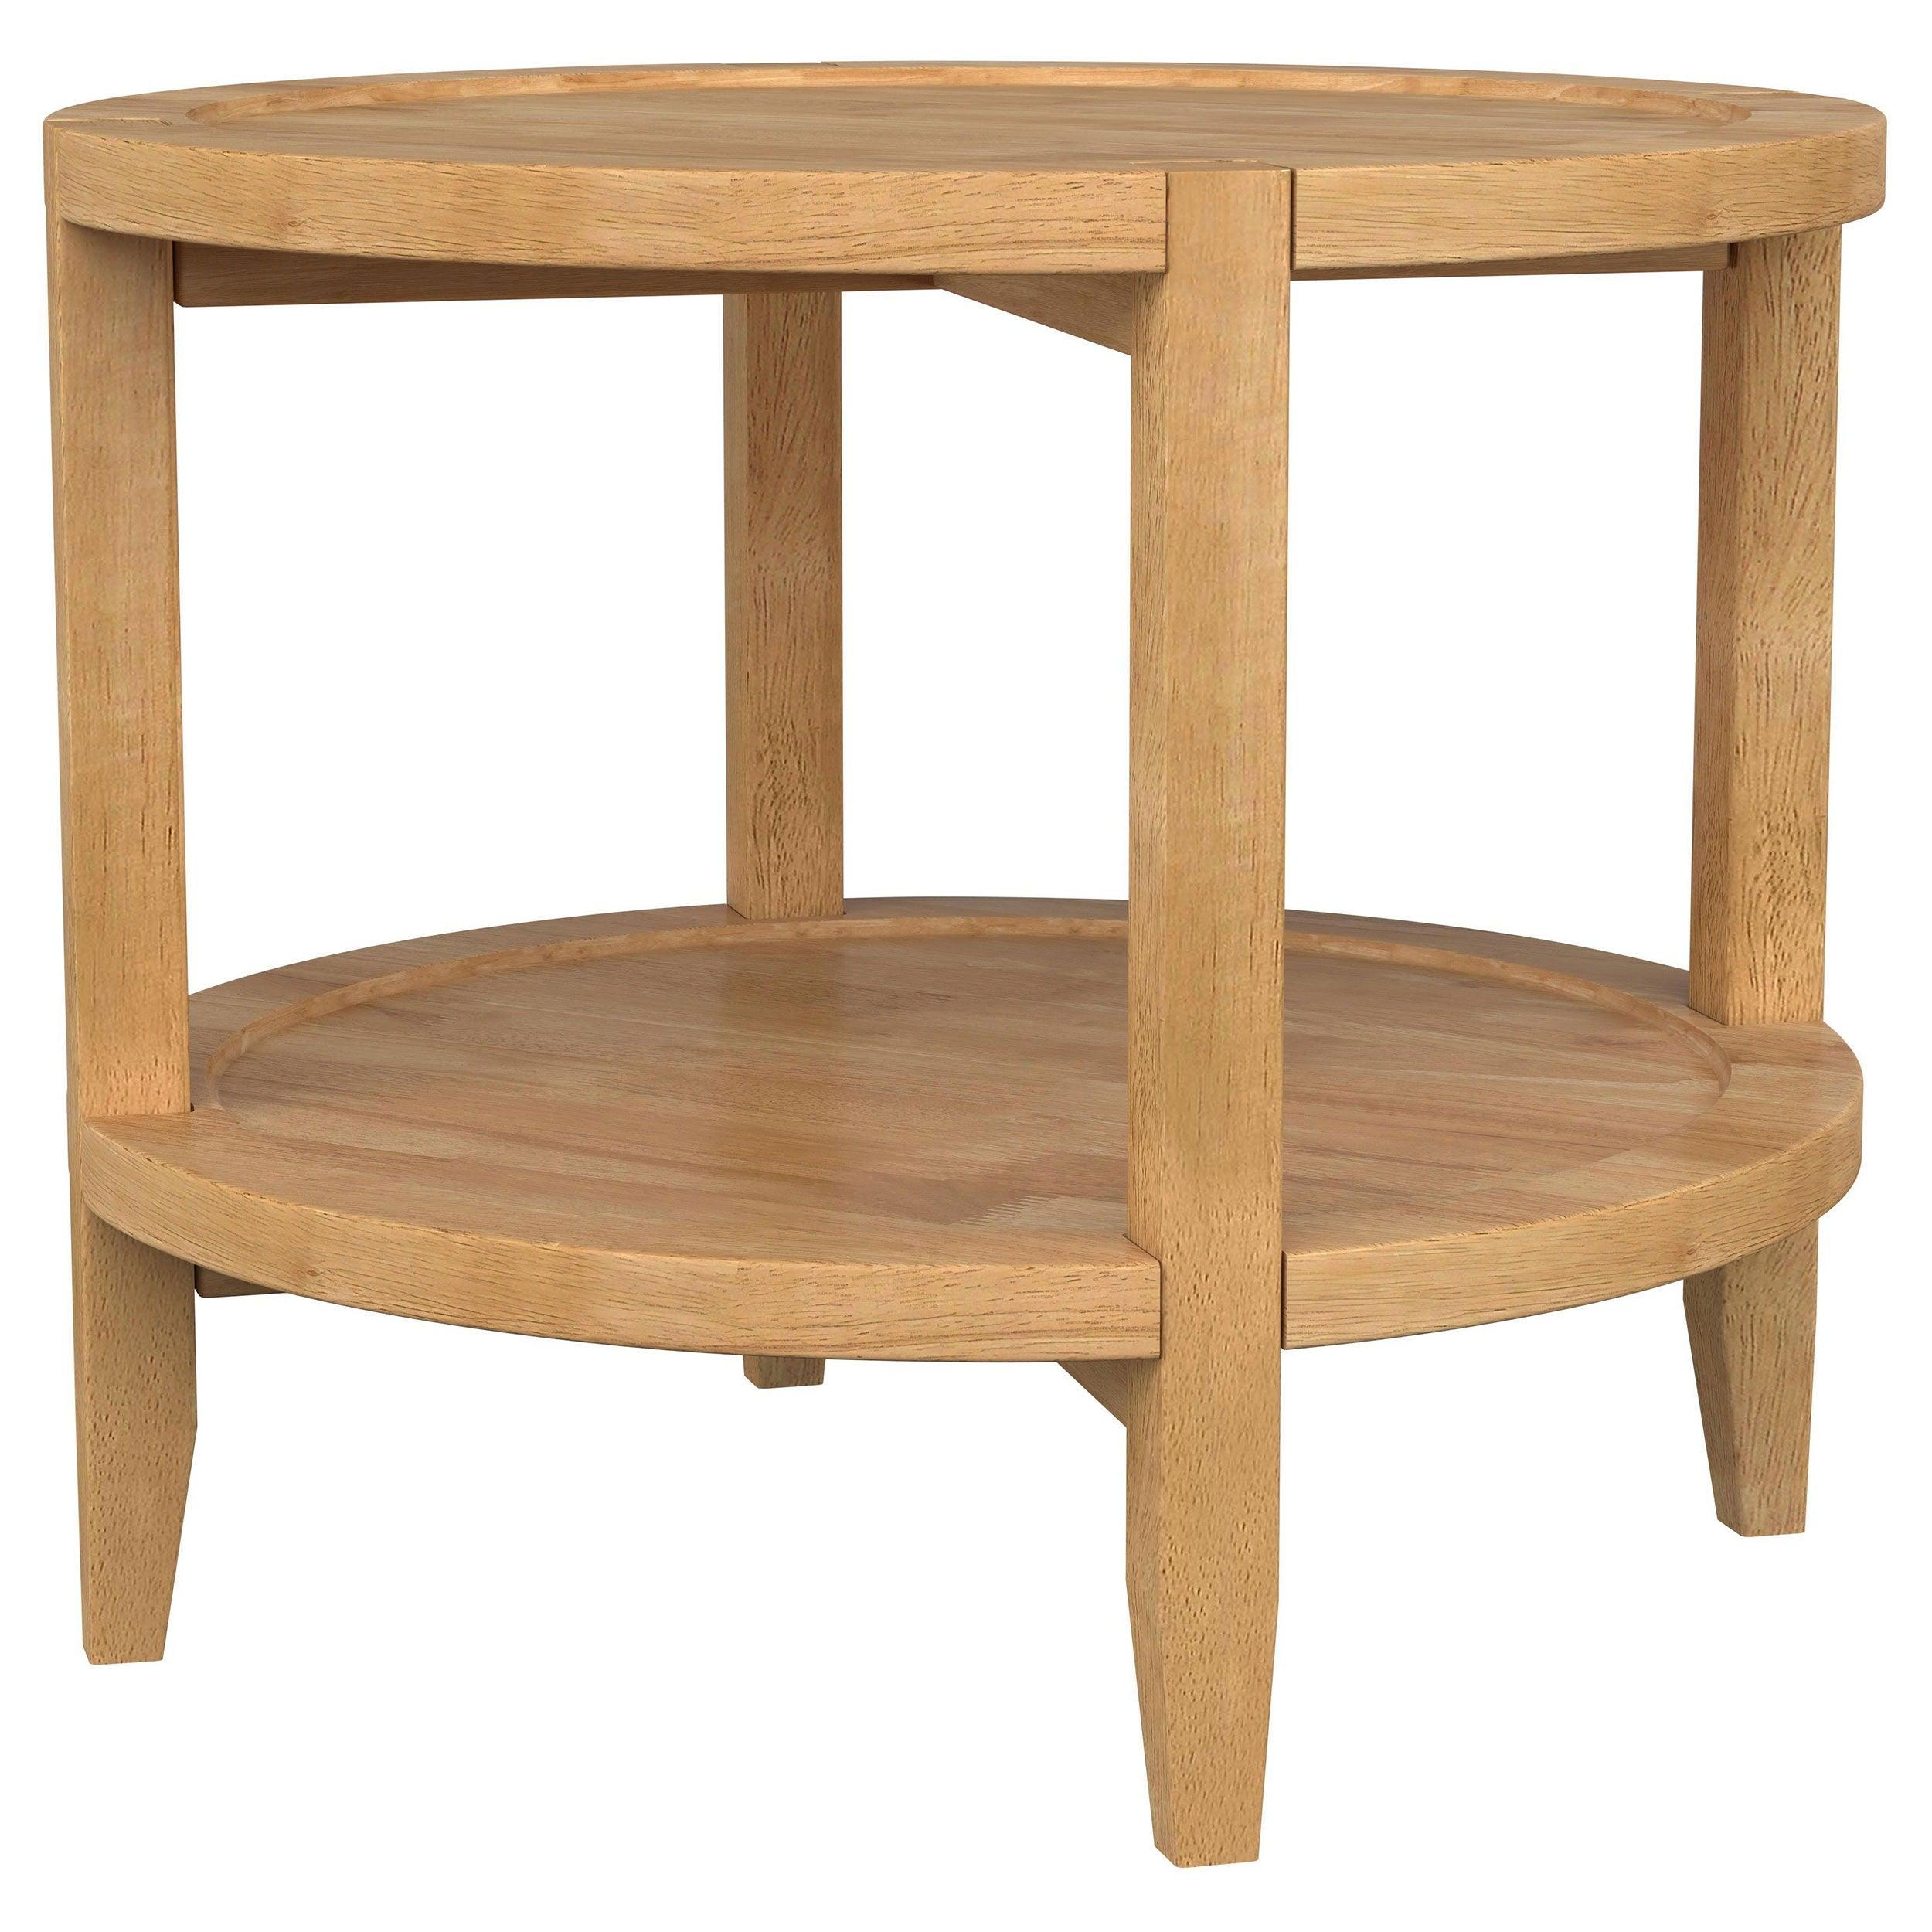 Coaster Fine Furniture - Camillo - Round Solid Wood End Table With Shelf - Maple Brown - 5th Avenue Furniture